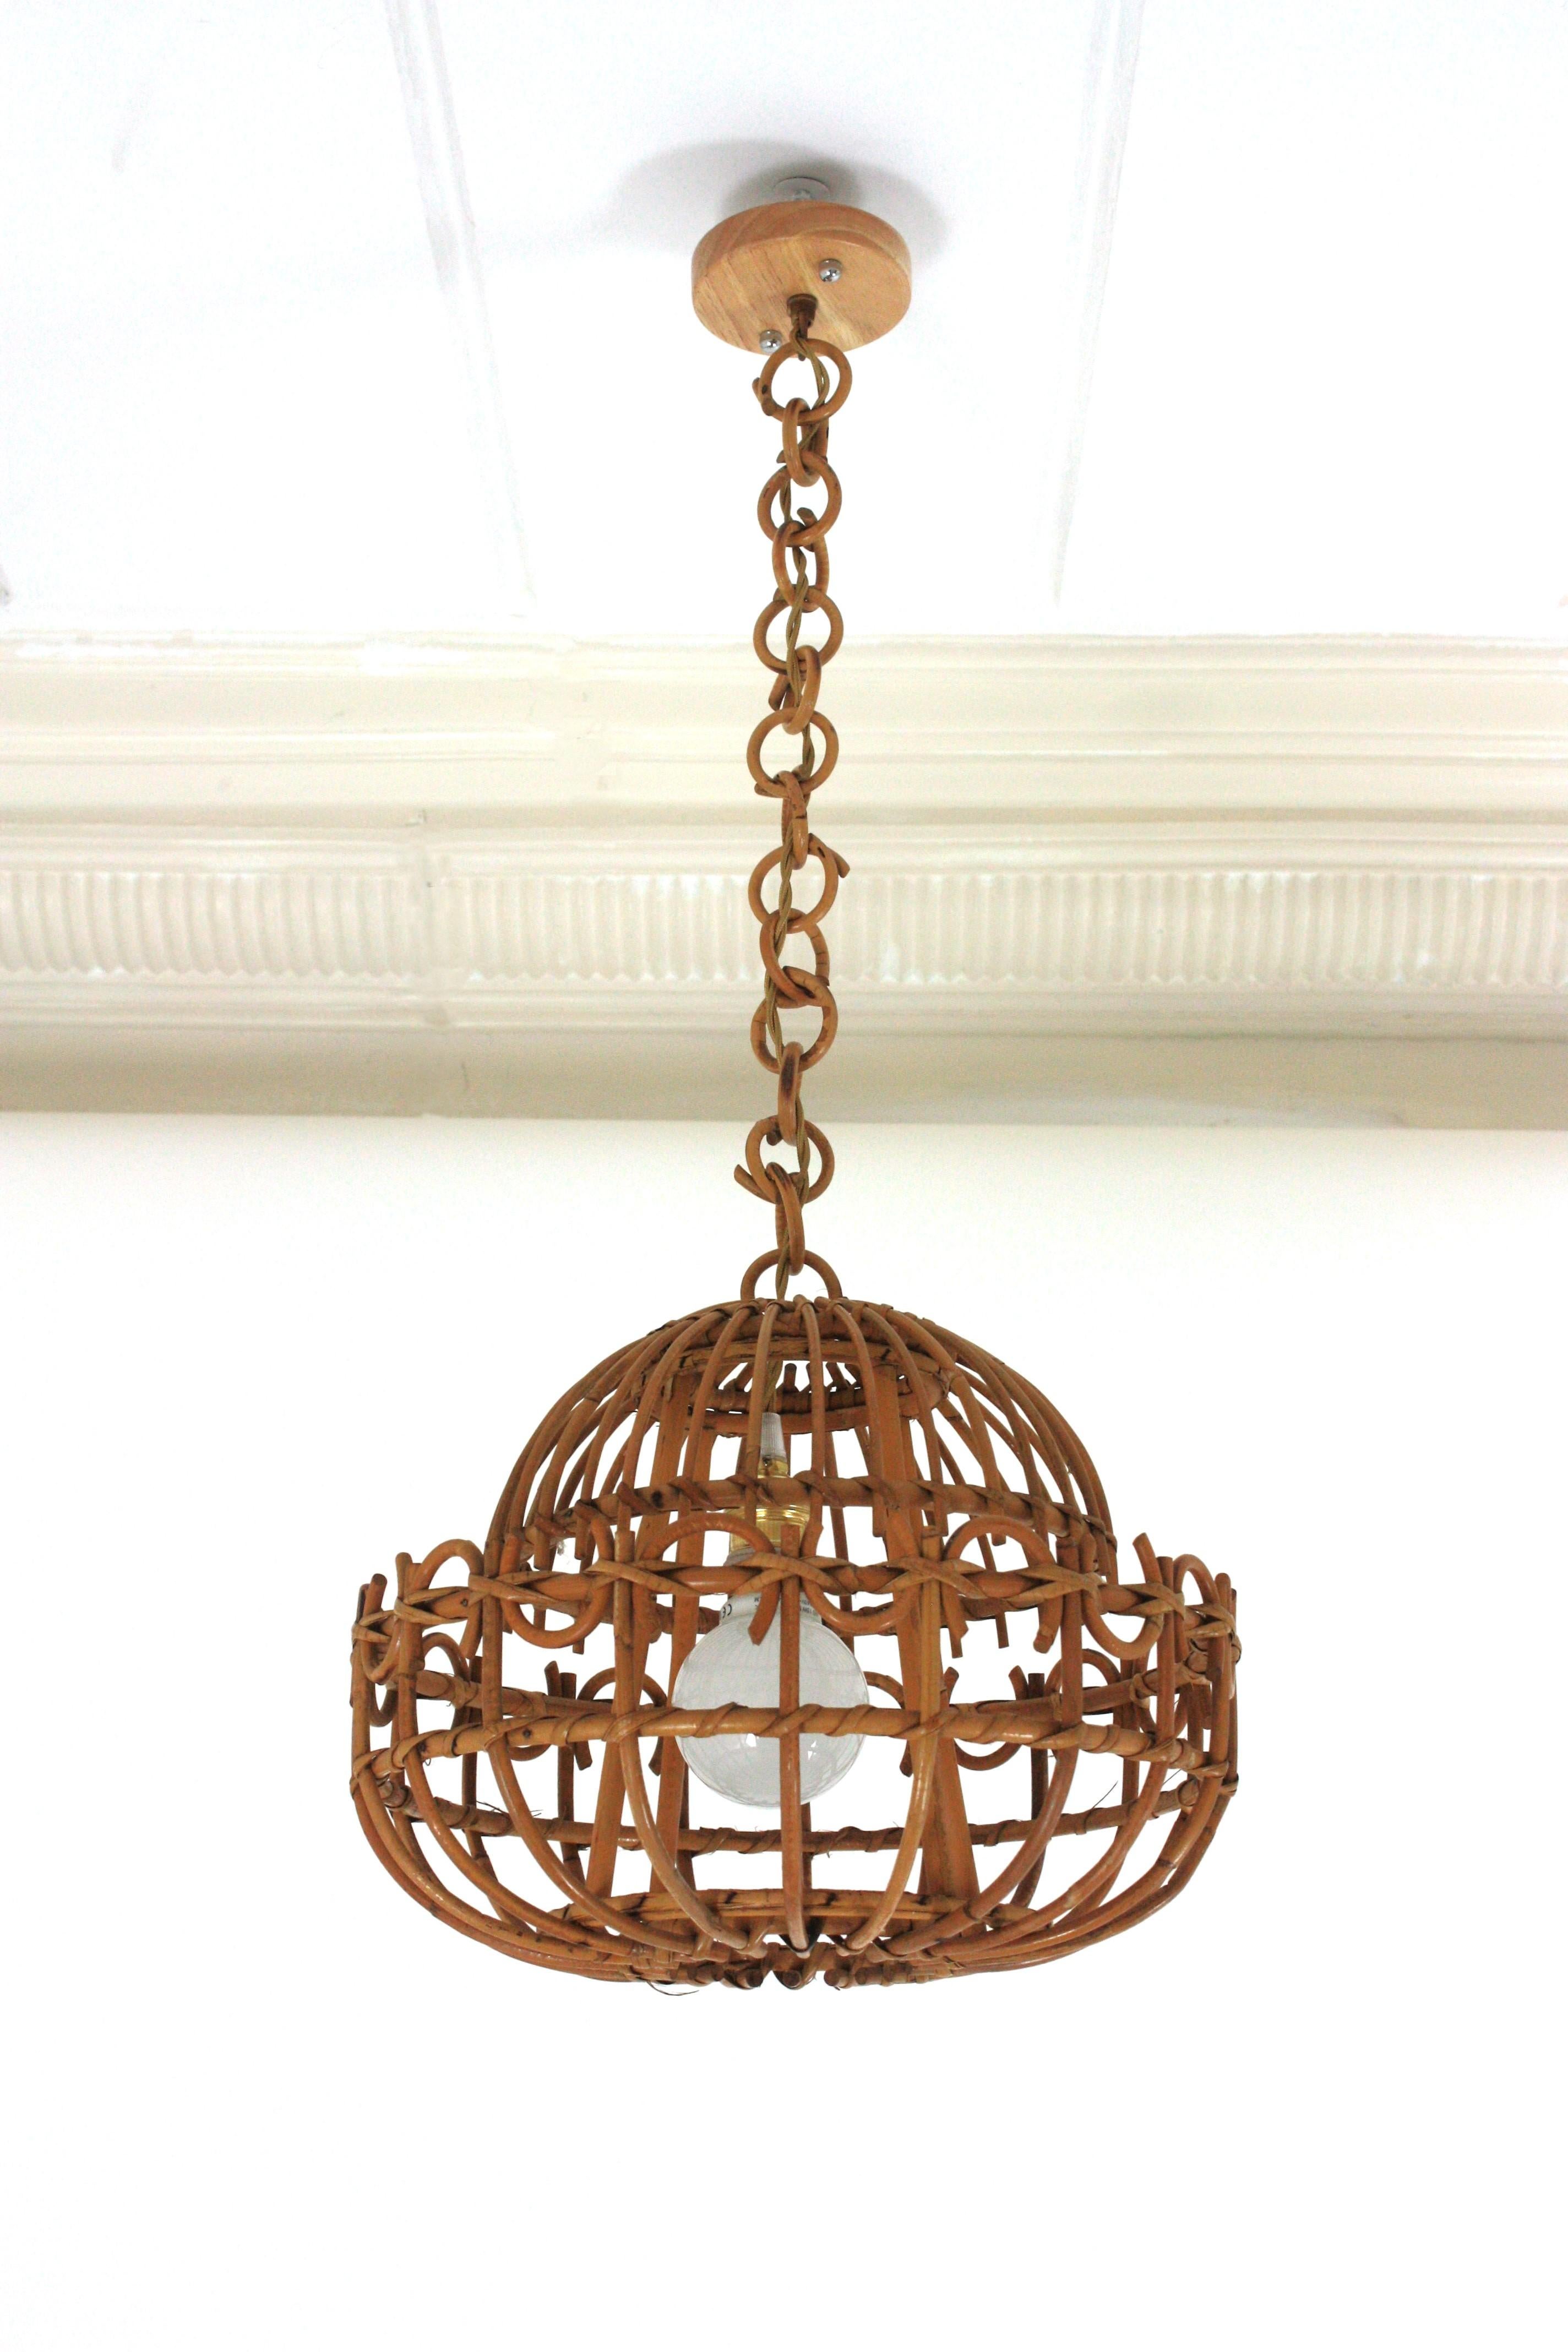 A cool handcrafted rattan ceiling pendant or hanging light with chinoiserie accents, Spain, 1960s.
This suspension has an eye-catching design featuring a semi-spherical rattan structure decorated by chinoiserie accents and semi rings details. It